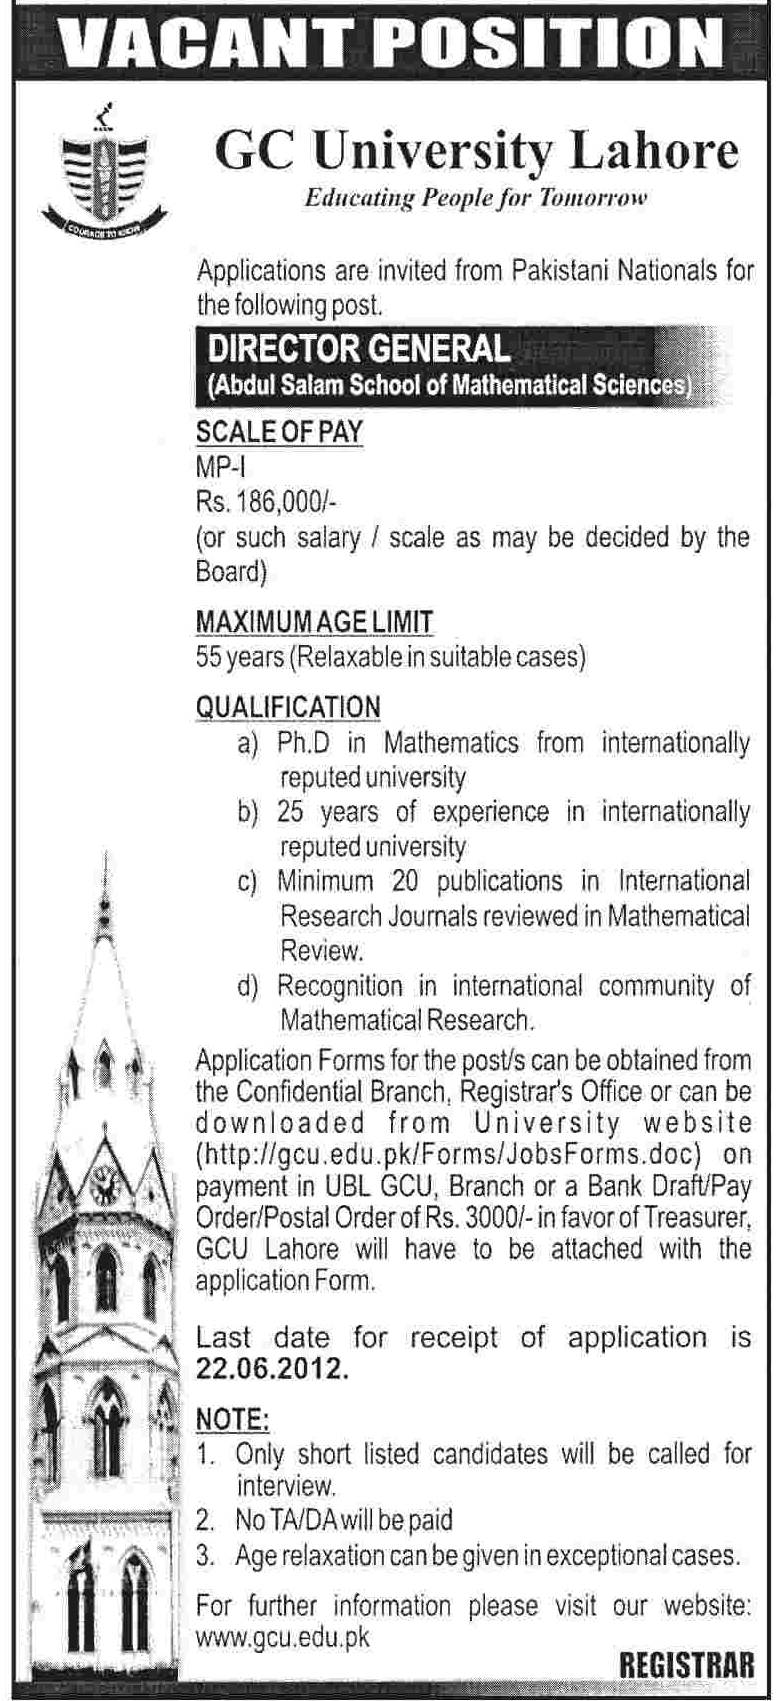 Director General Required at GC University